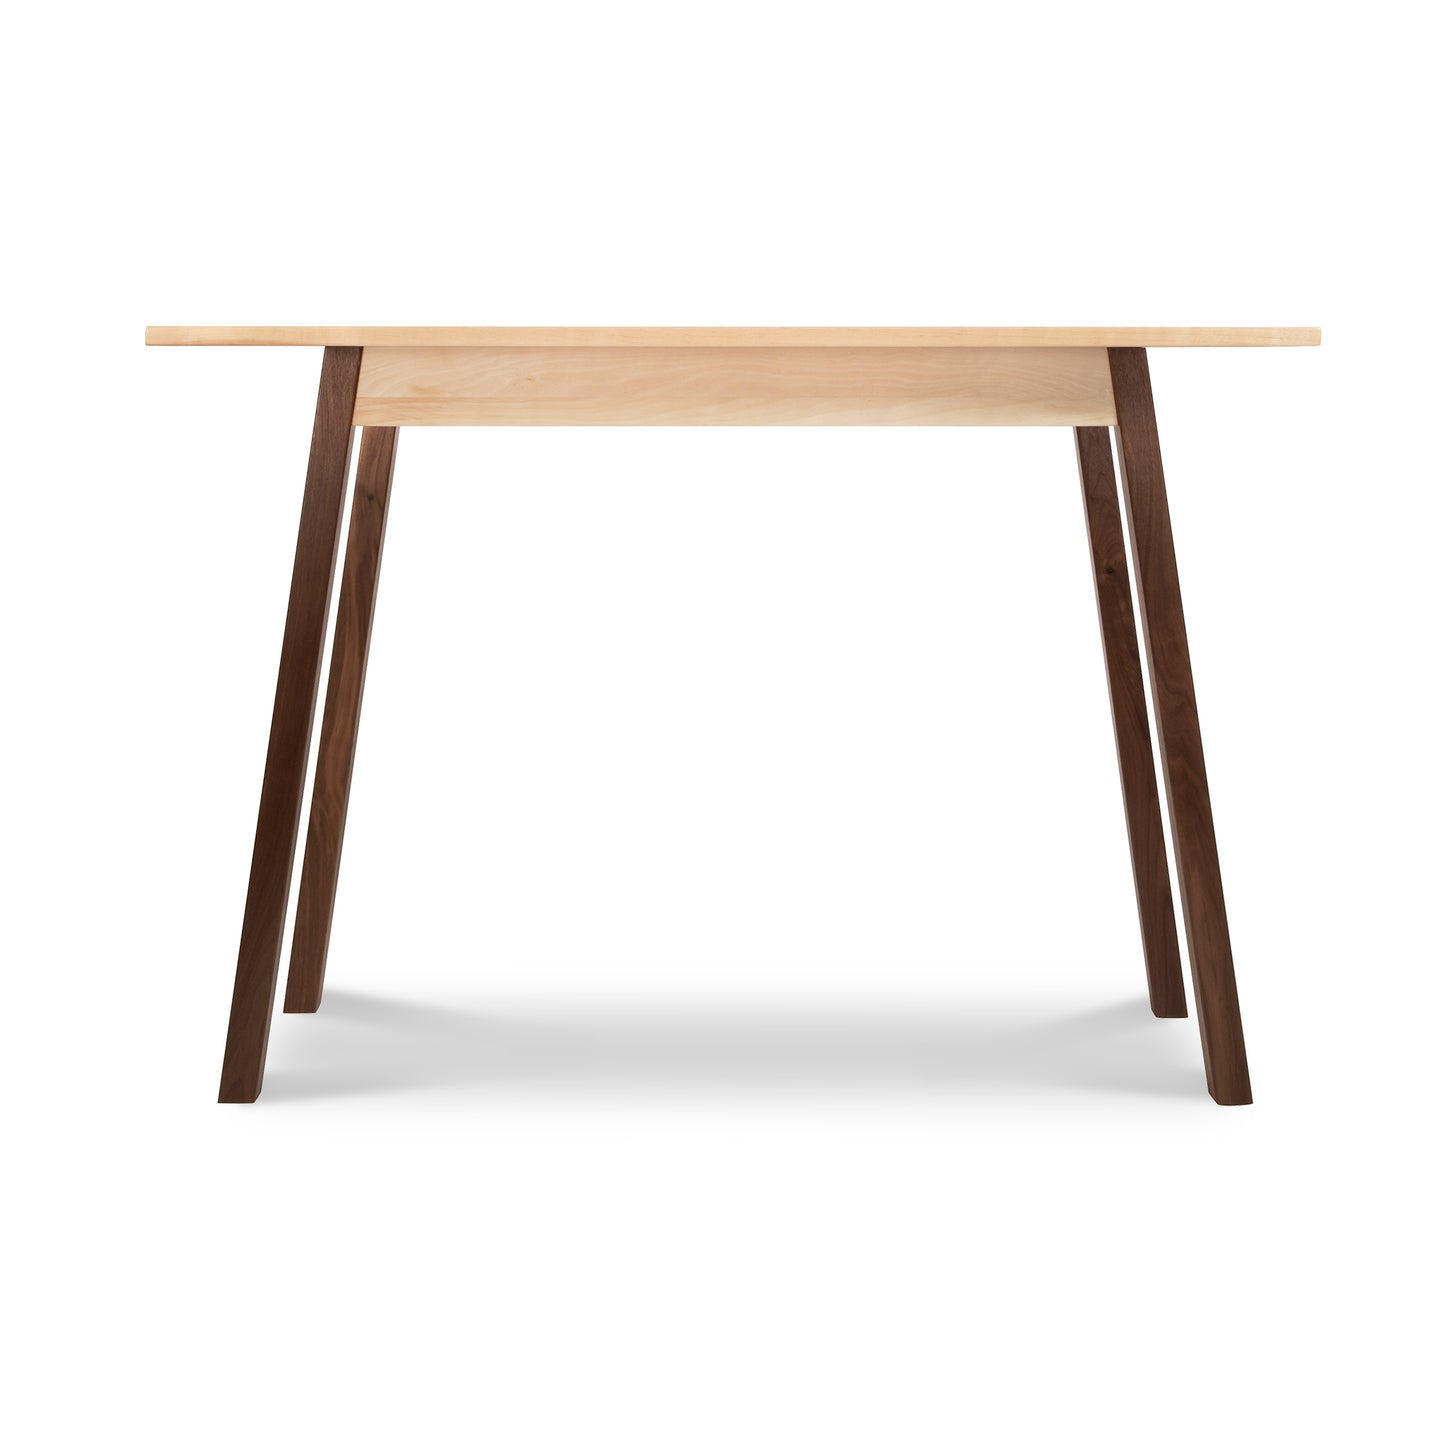 A Manchester Two-Tone Compact Desk - Birch/Walnut - Floor Model with brown legs showcasing Vermont Woods Studios craftsmanship.